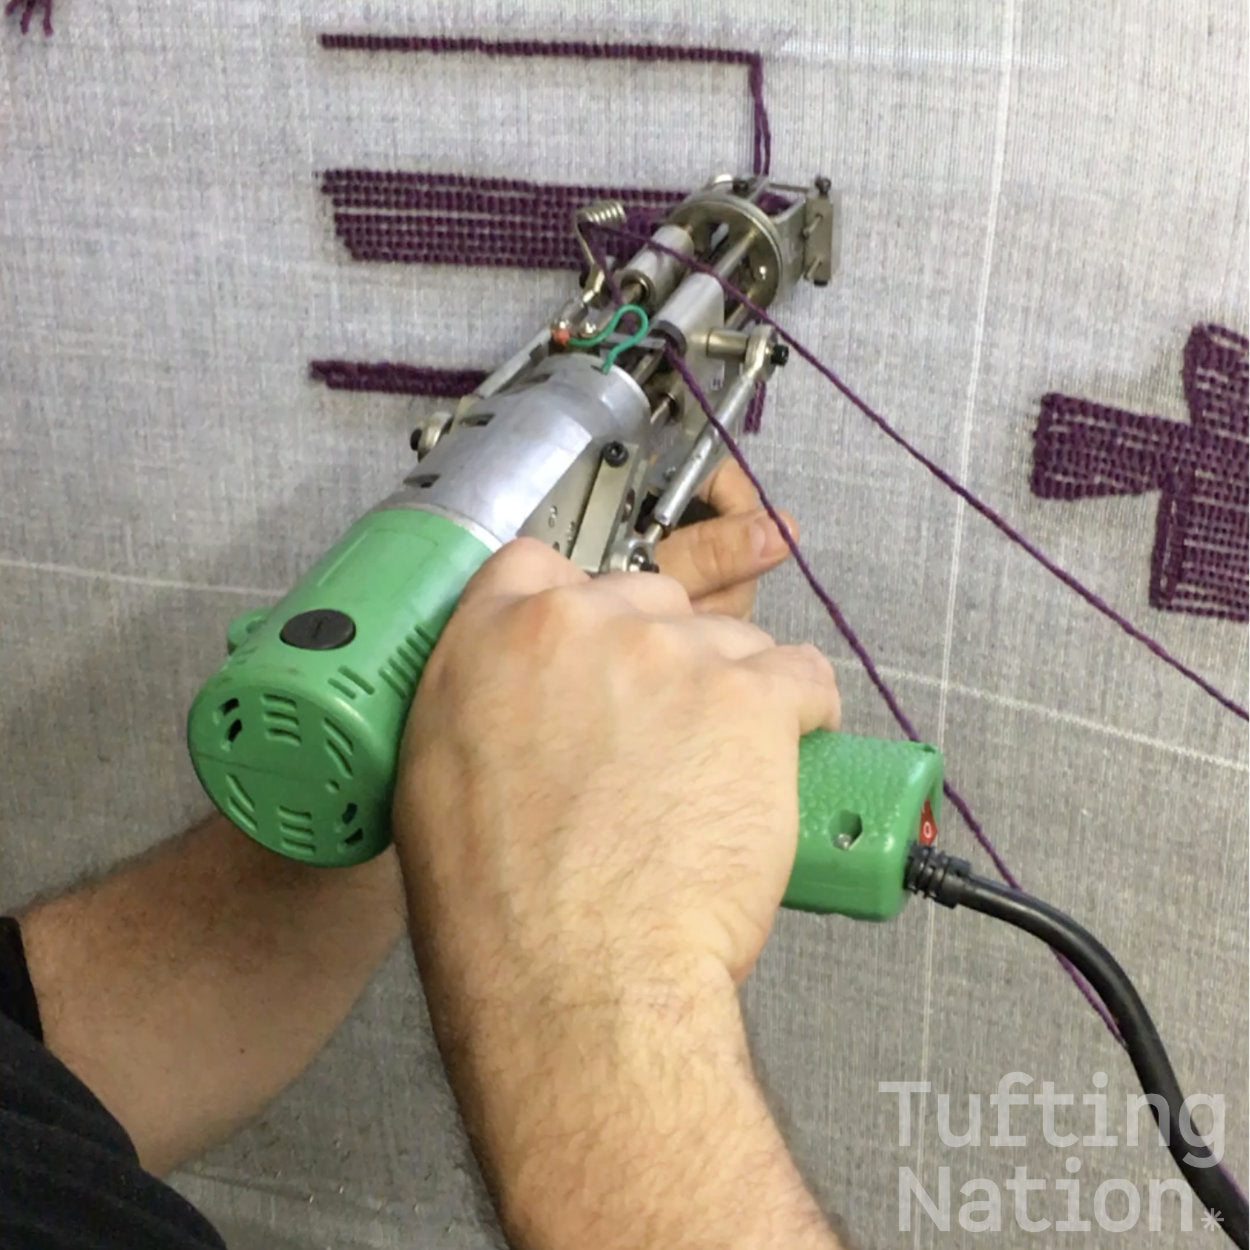 Tufting Gun Making tuft in a Primary Rug Backing | TuftingNation Canada